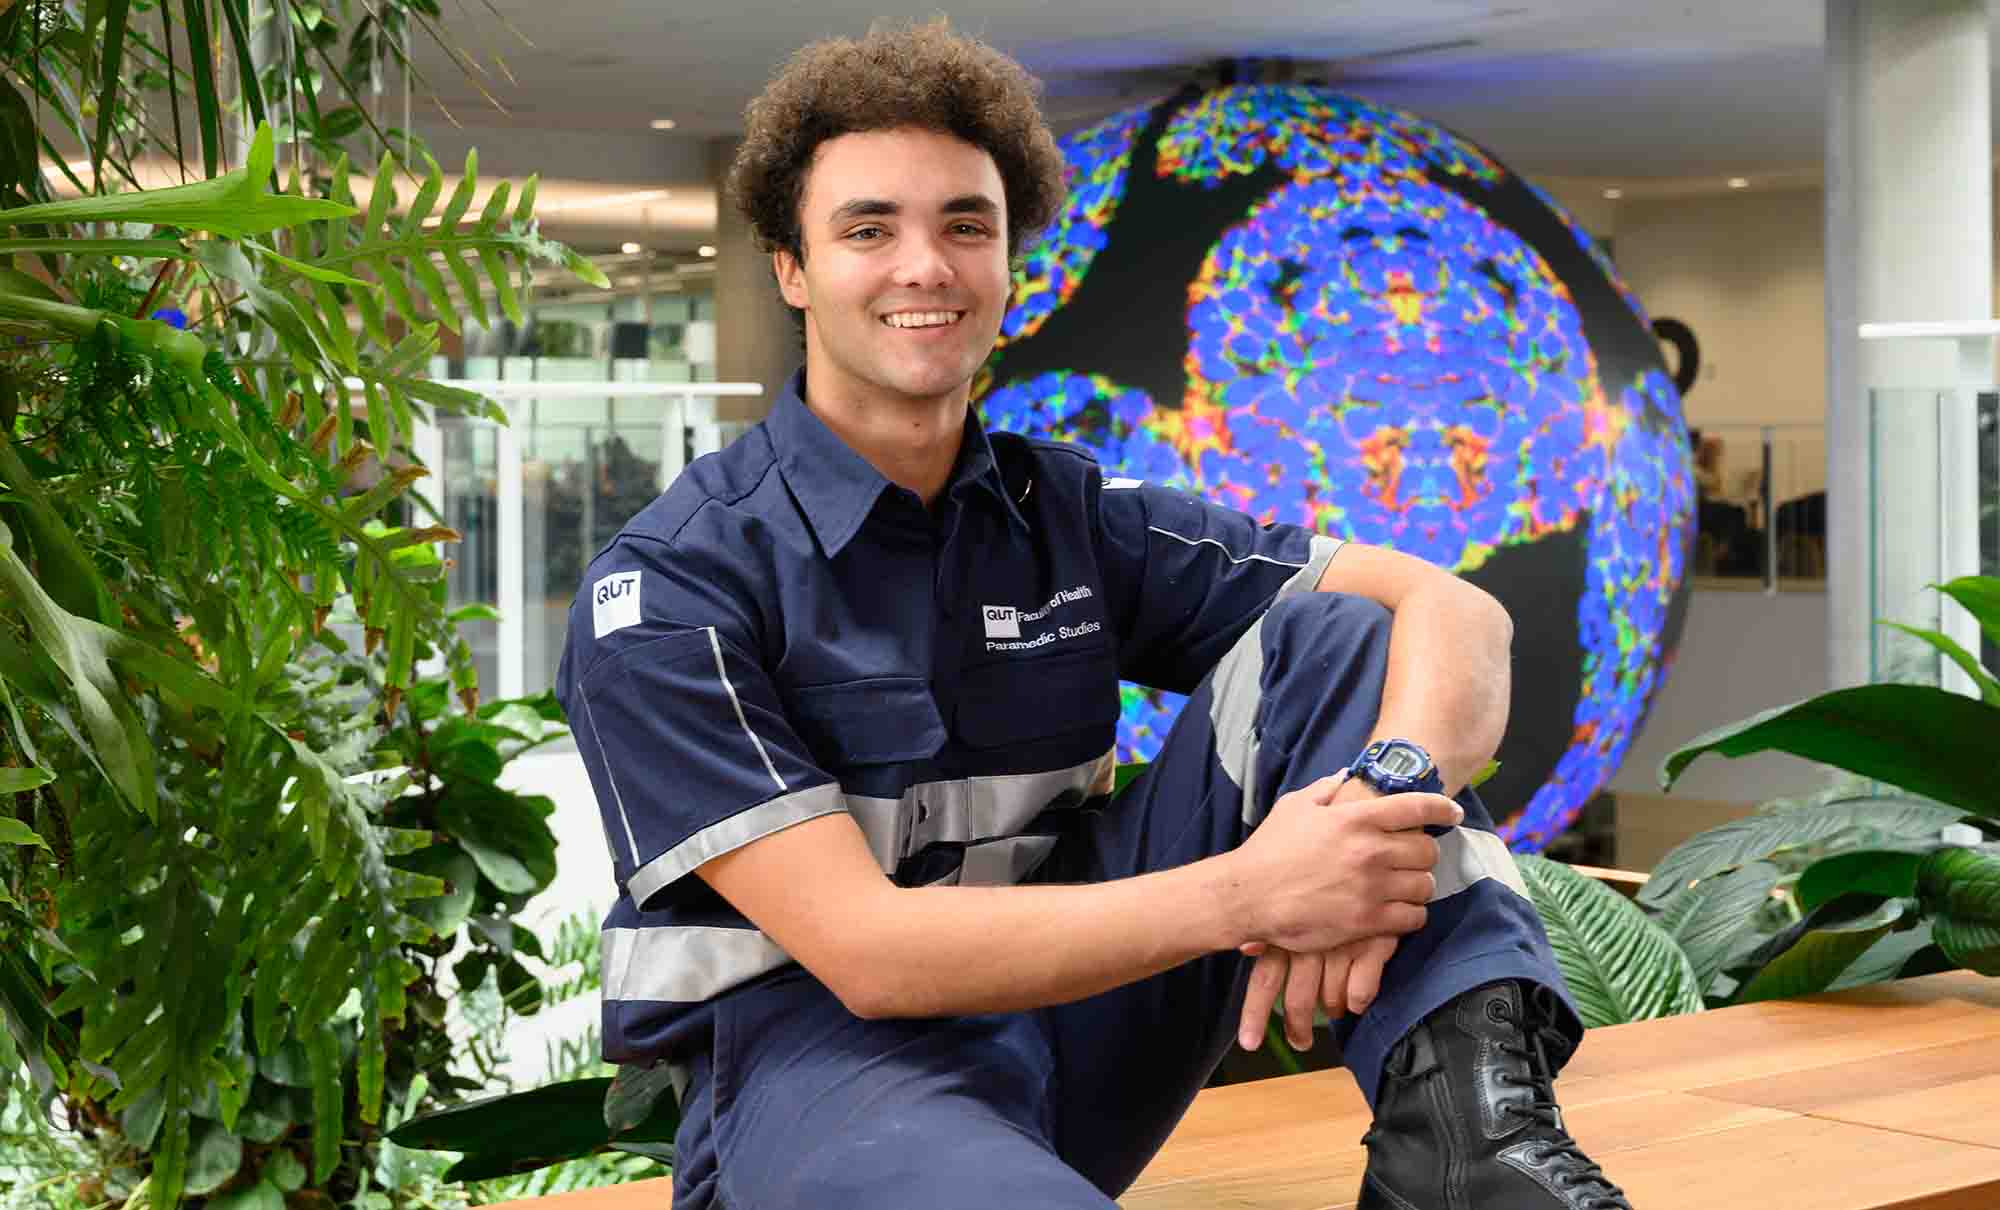 A paramedic science student wears a specialist uniform with pockets, clips and boots. 